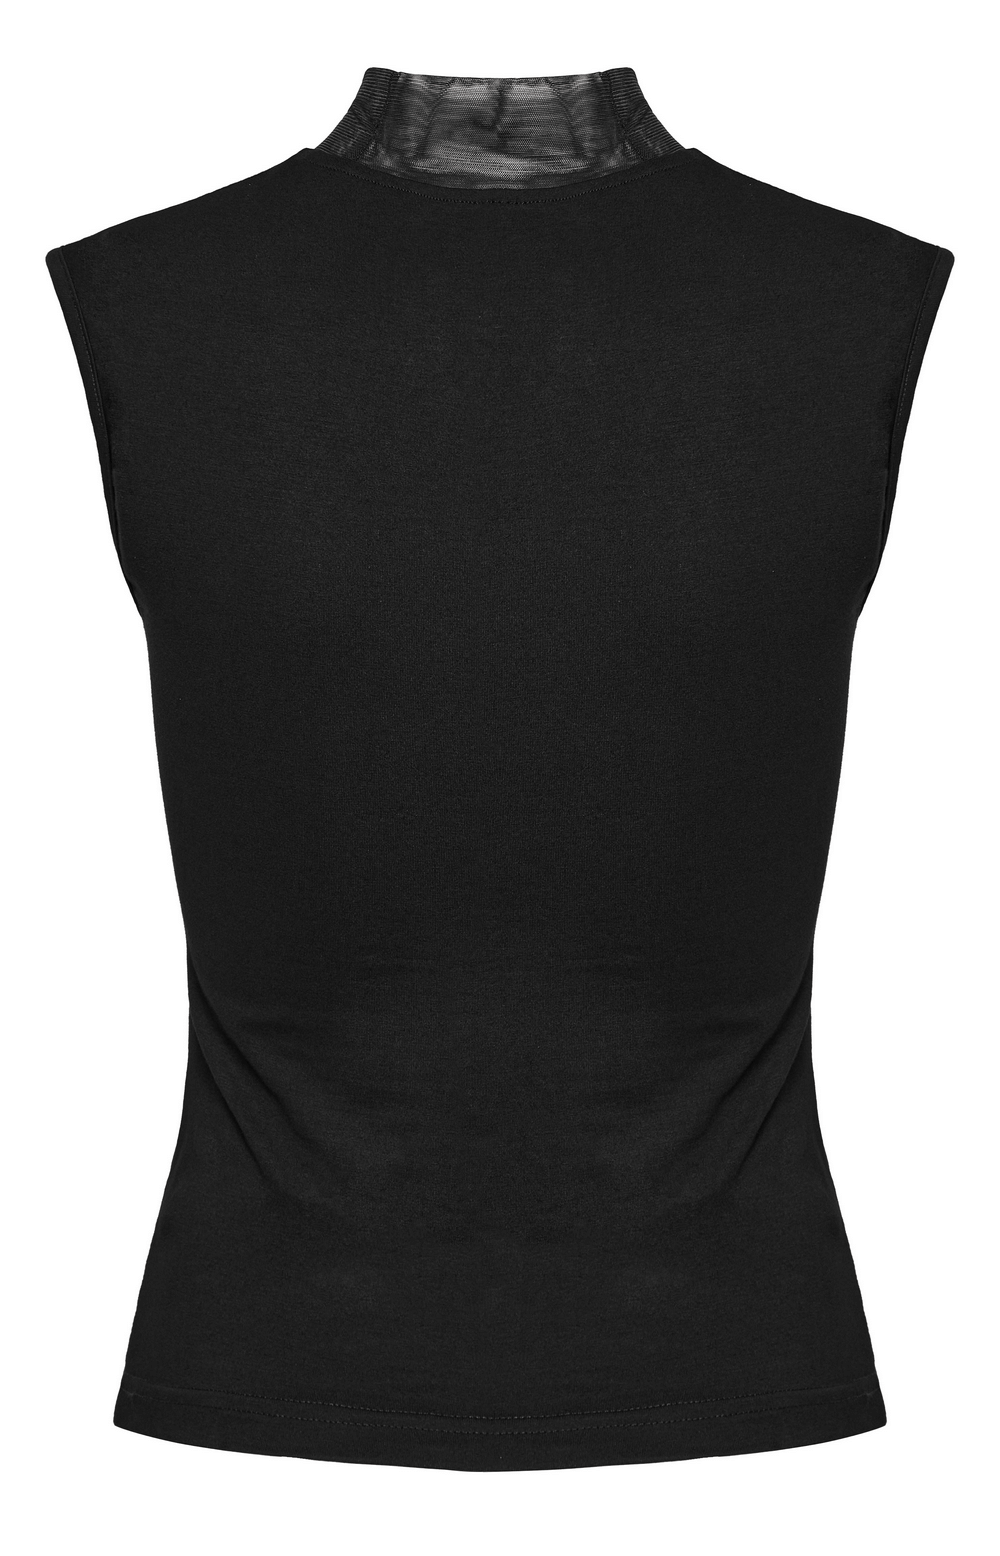 Gothic Black High Neck Top With Skeleton Pleats